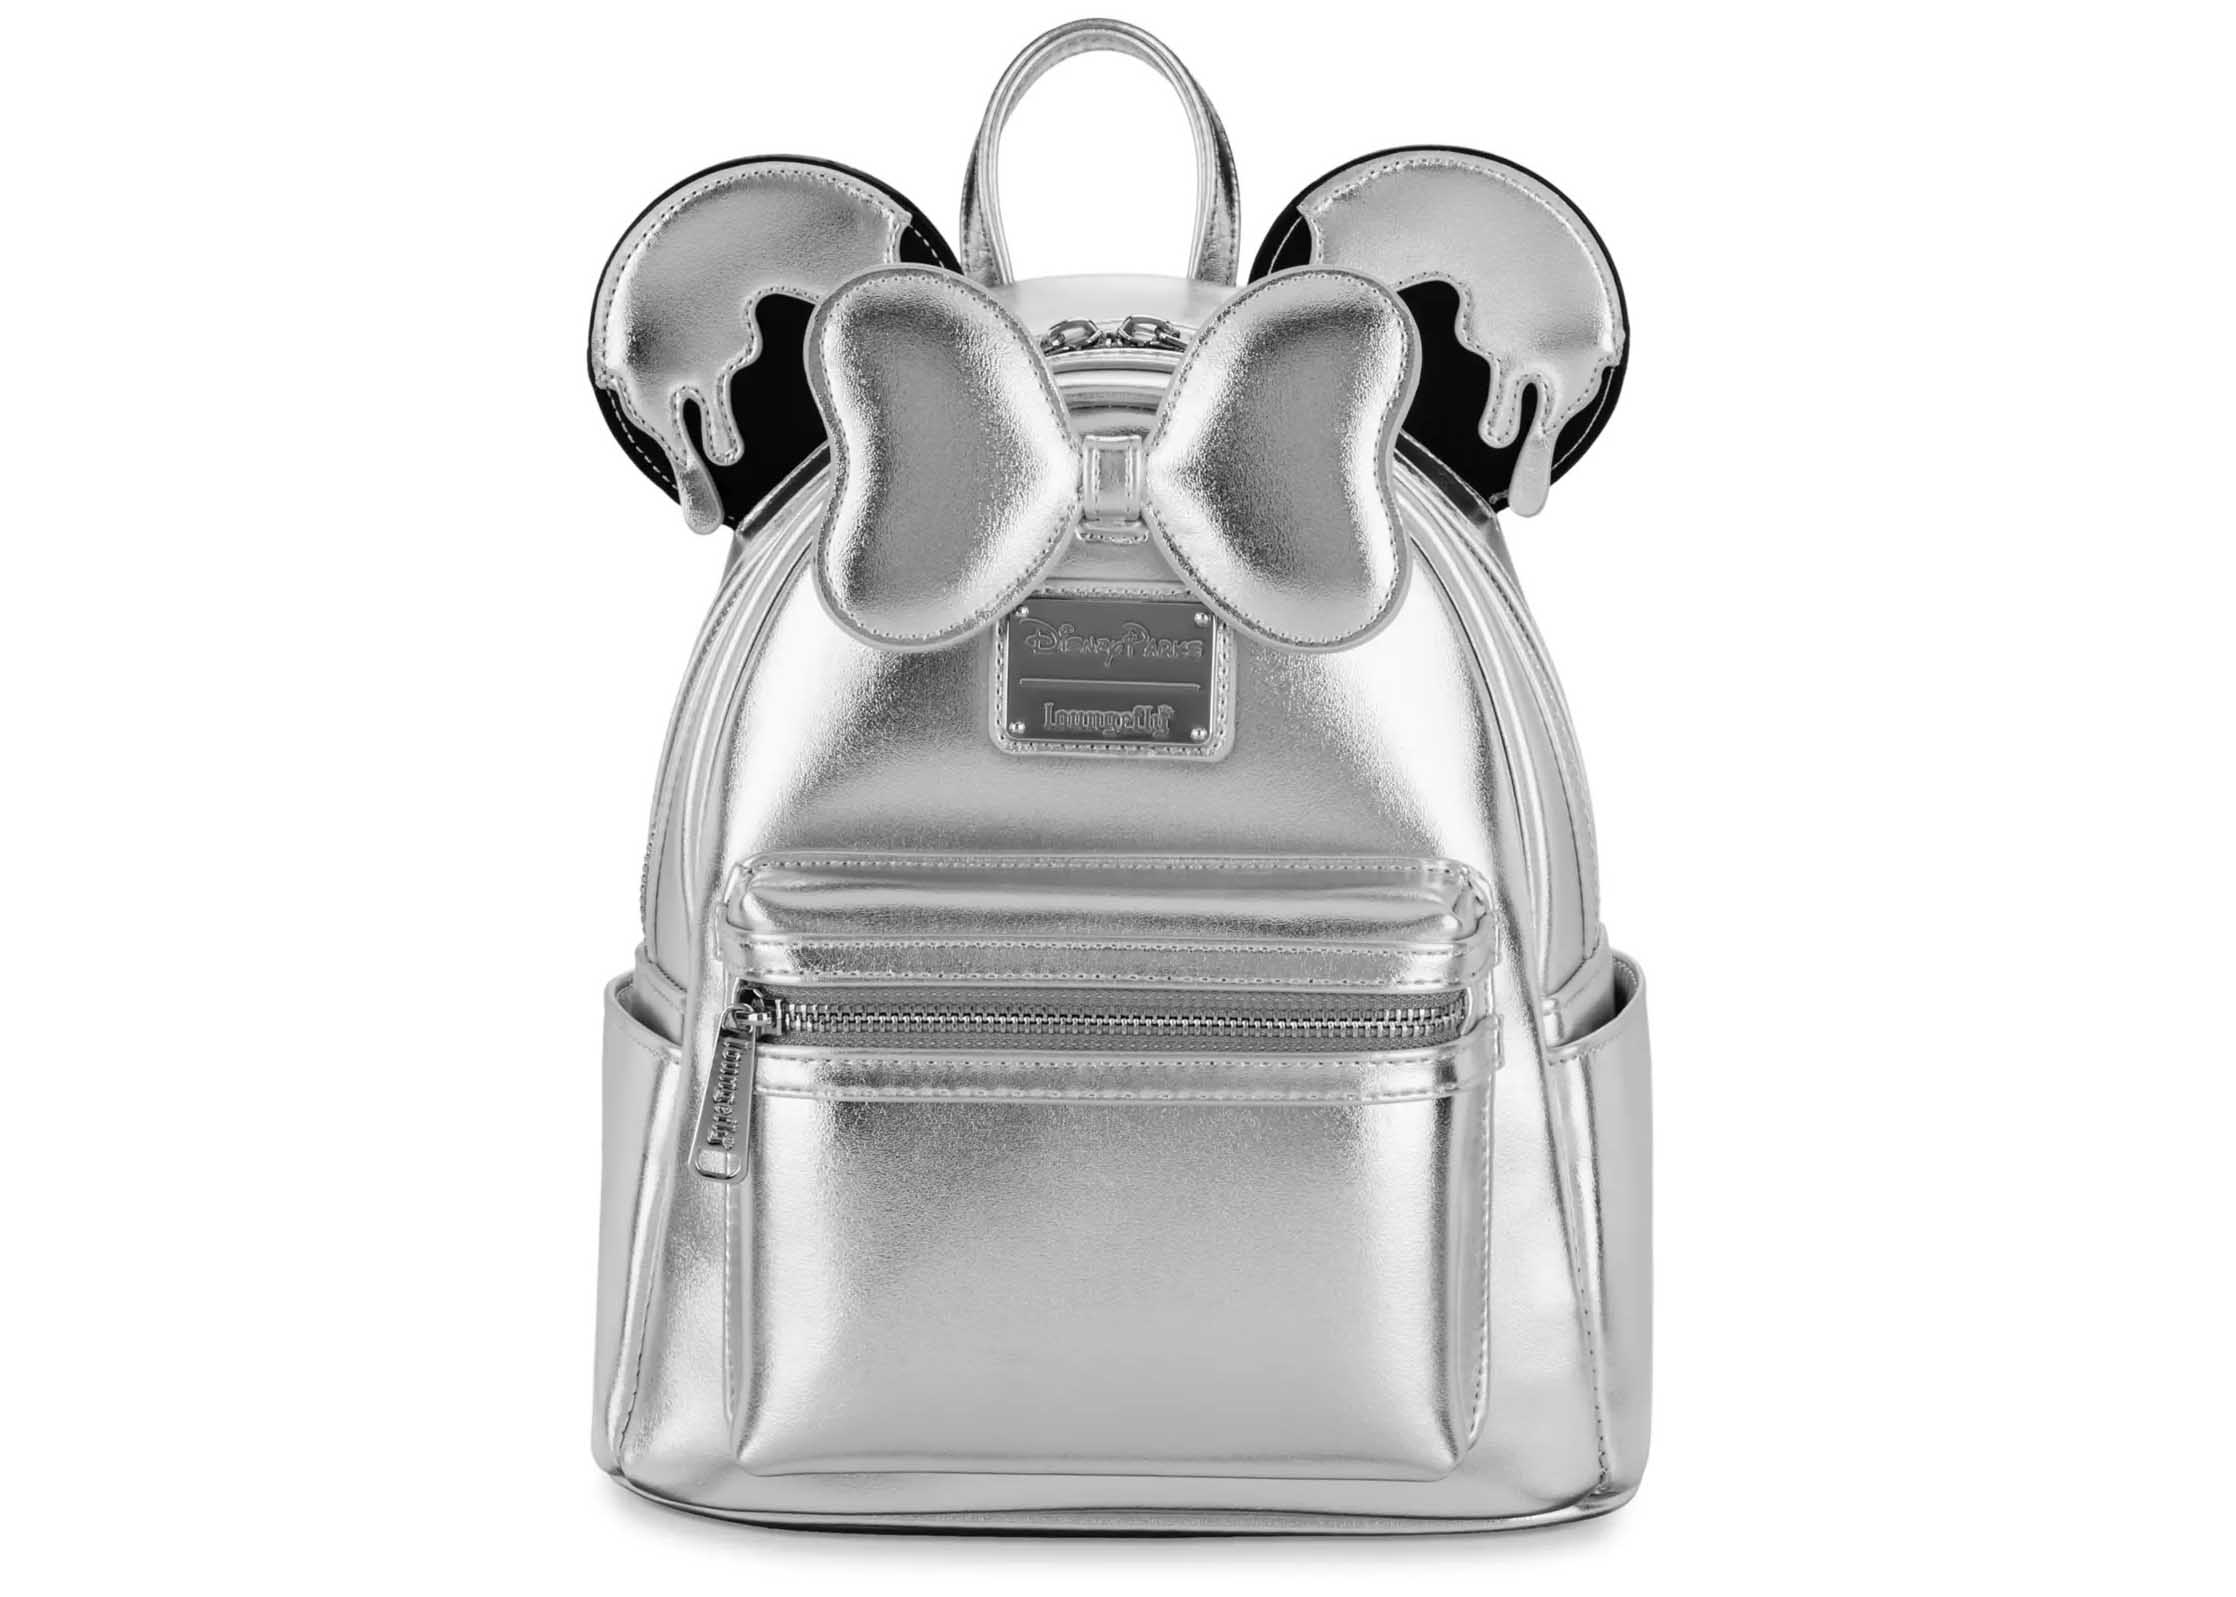 Mini Backpack for Girls Cute Bowknot Toddler Backpack Purse Cartoon Mouse  Ears Purse Mini Backpack for Teen Girls, Blue, Small : Amazon.in: Bags,  Wallets and Luggage